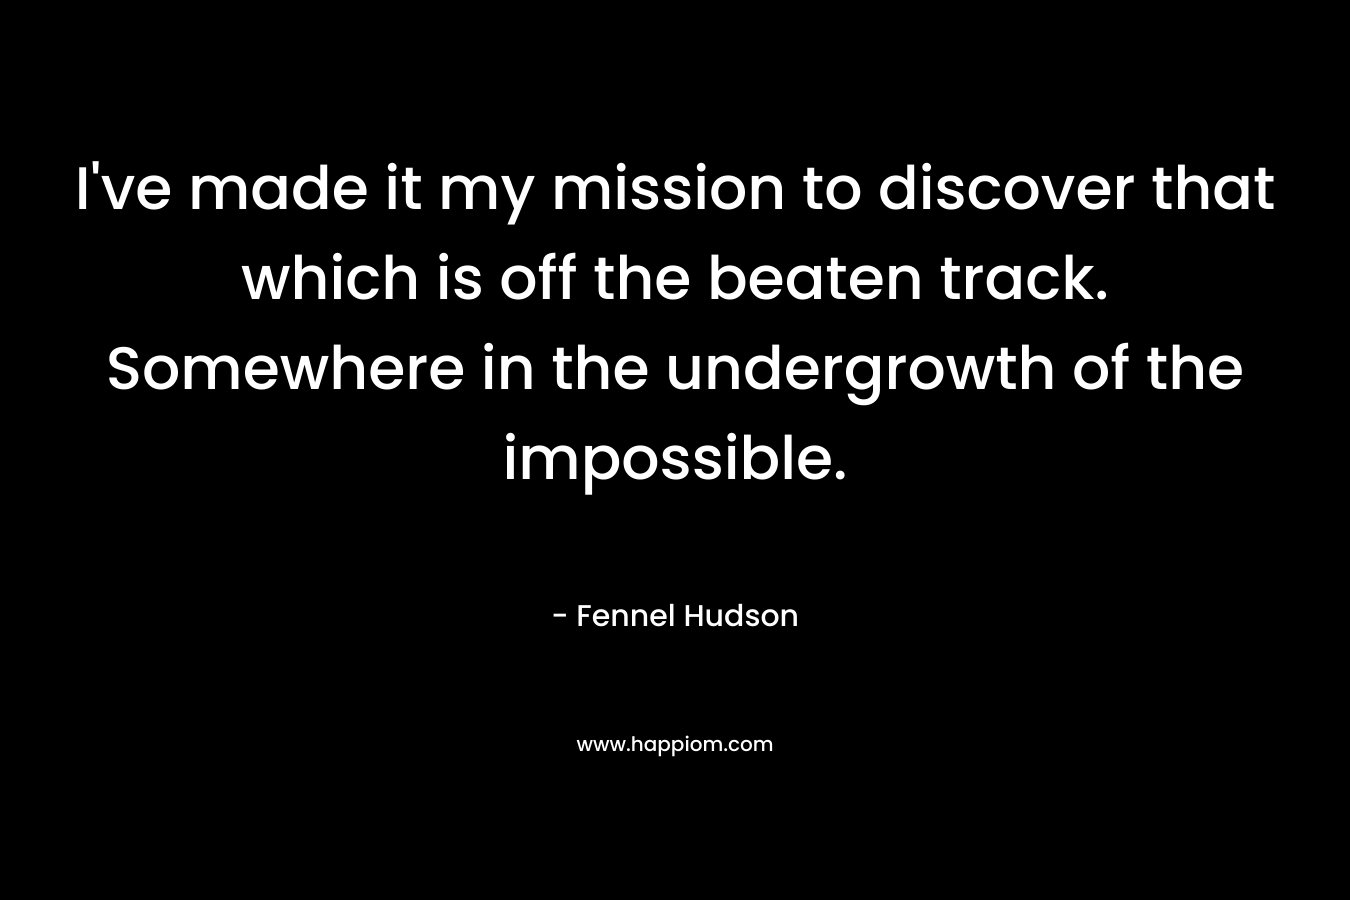 I’ve made it my mission to discover that which is off the beaten track. Somewhere in the undergrowth of the impossible. – Fennel Hudson